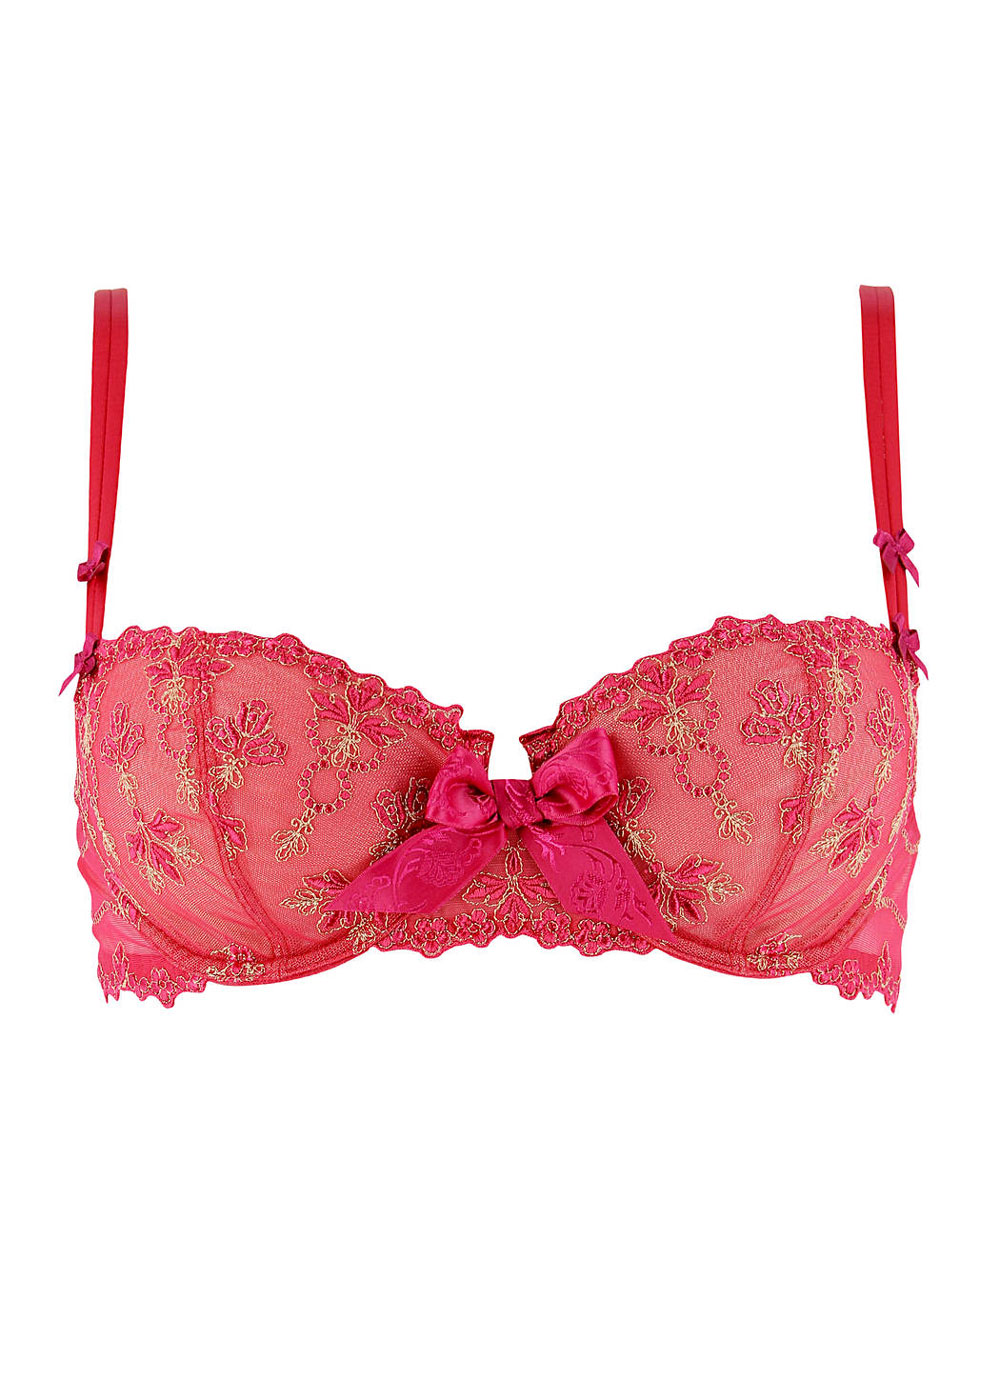 Soutien-gorge Corbeille Couture Verticale Lise Charmel Glamour Rubis